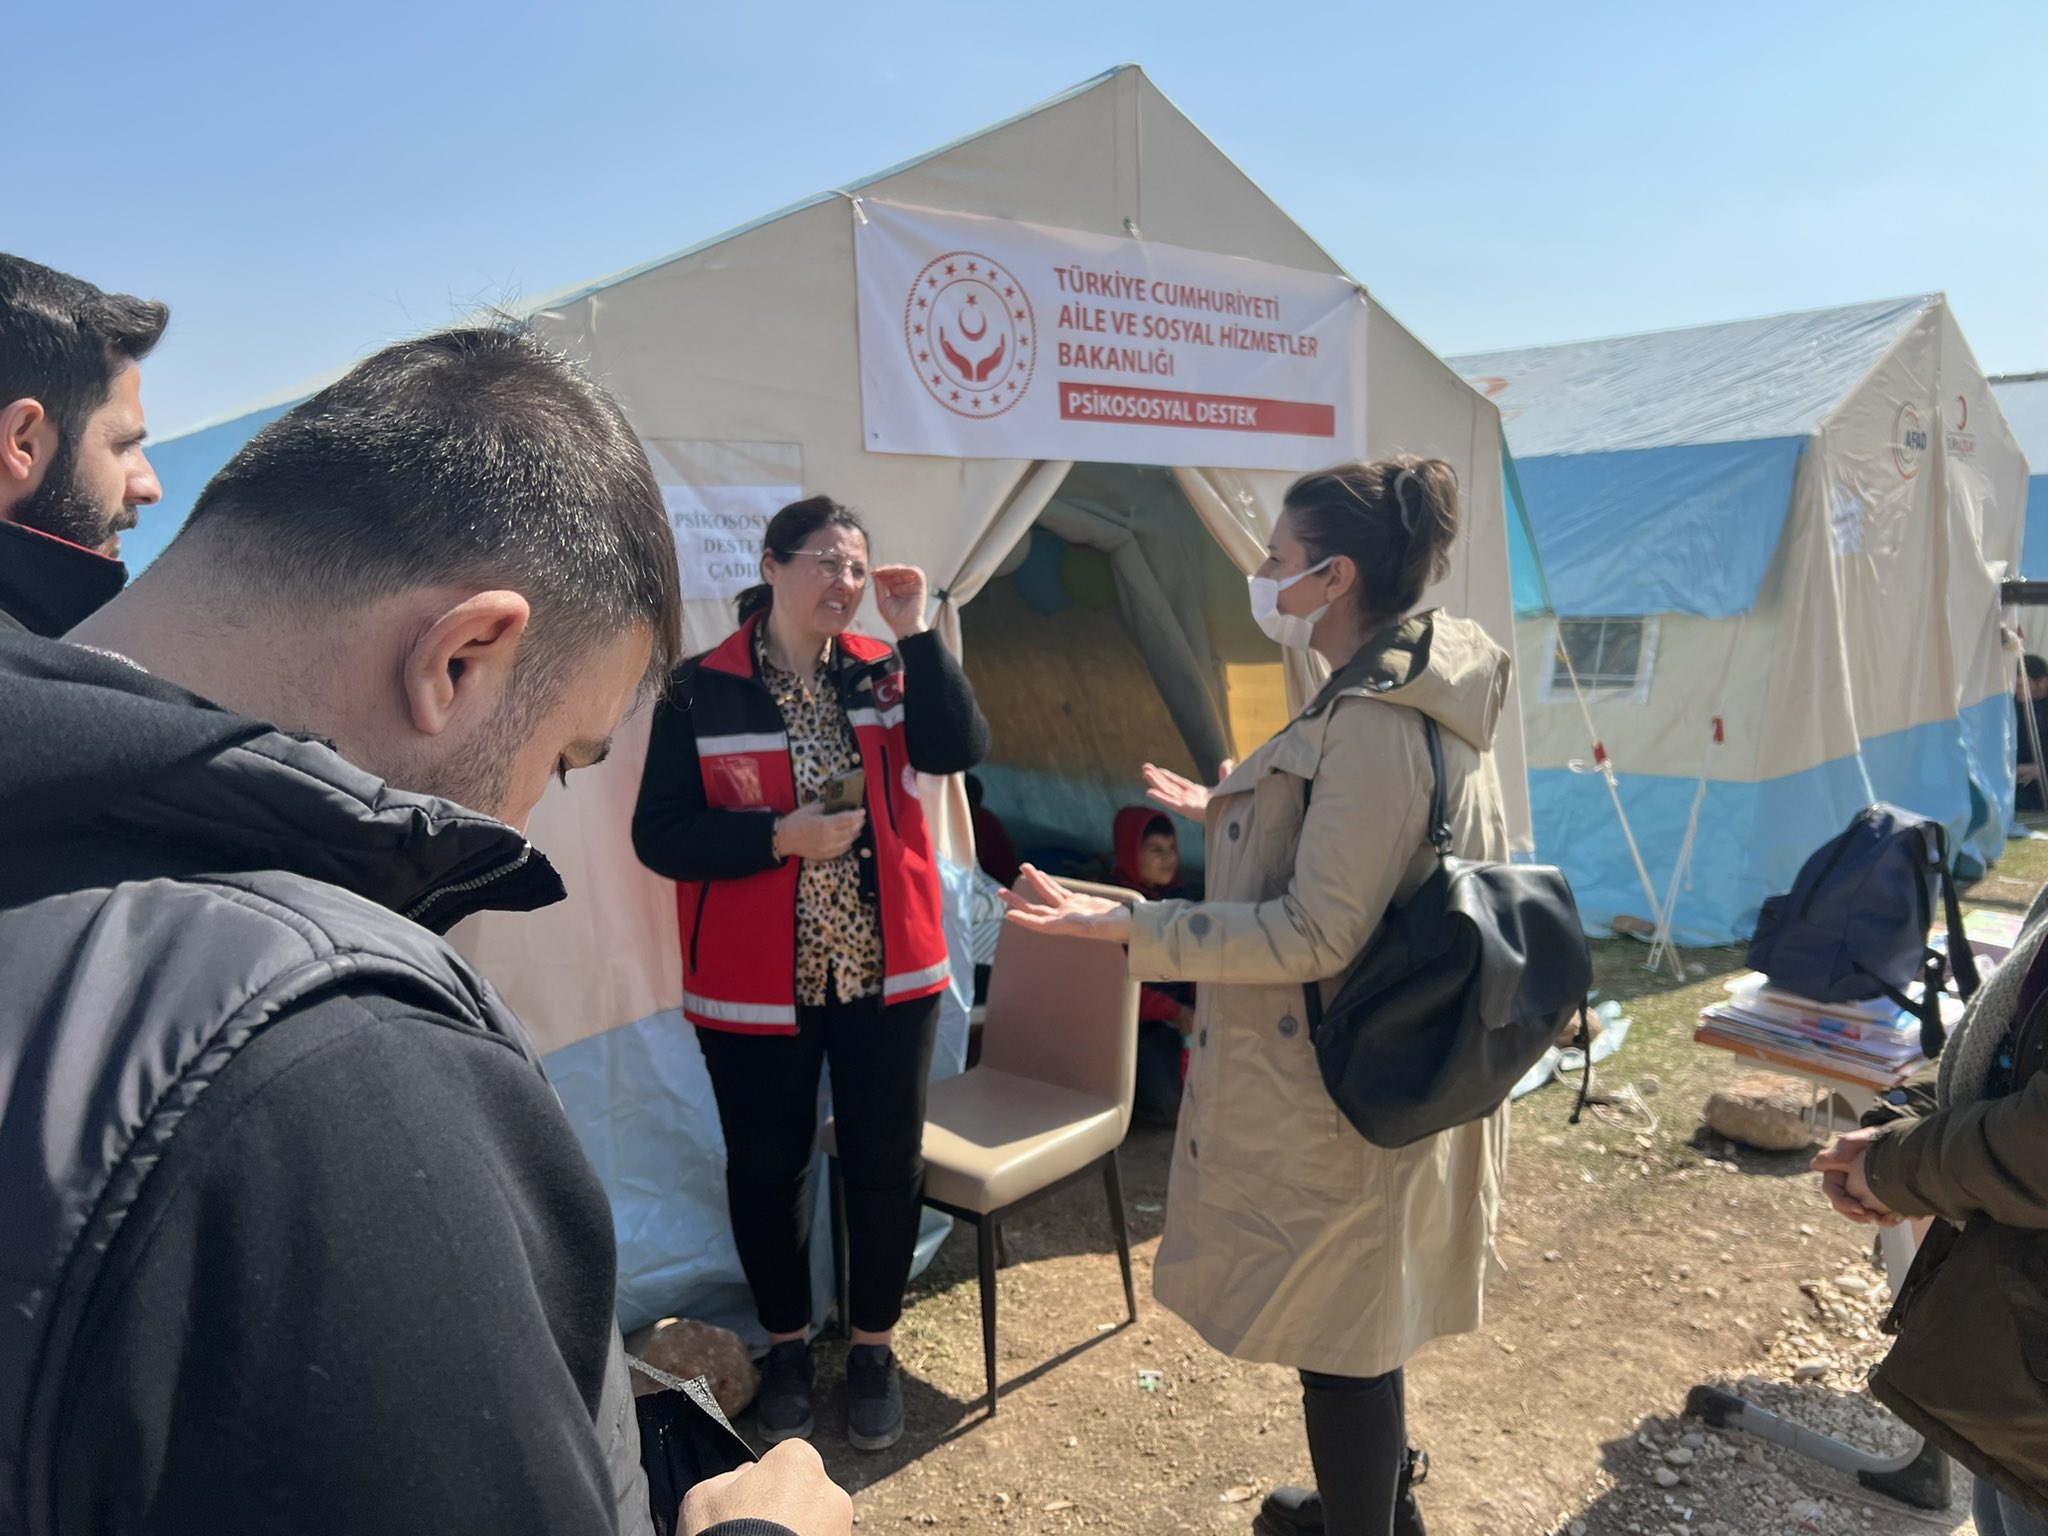 A woman in a red and white jacket speaks to another woman in beige, an activist with Leader Women Association, in front of tents for earthquake survivors.